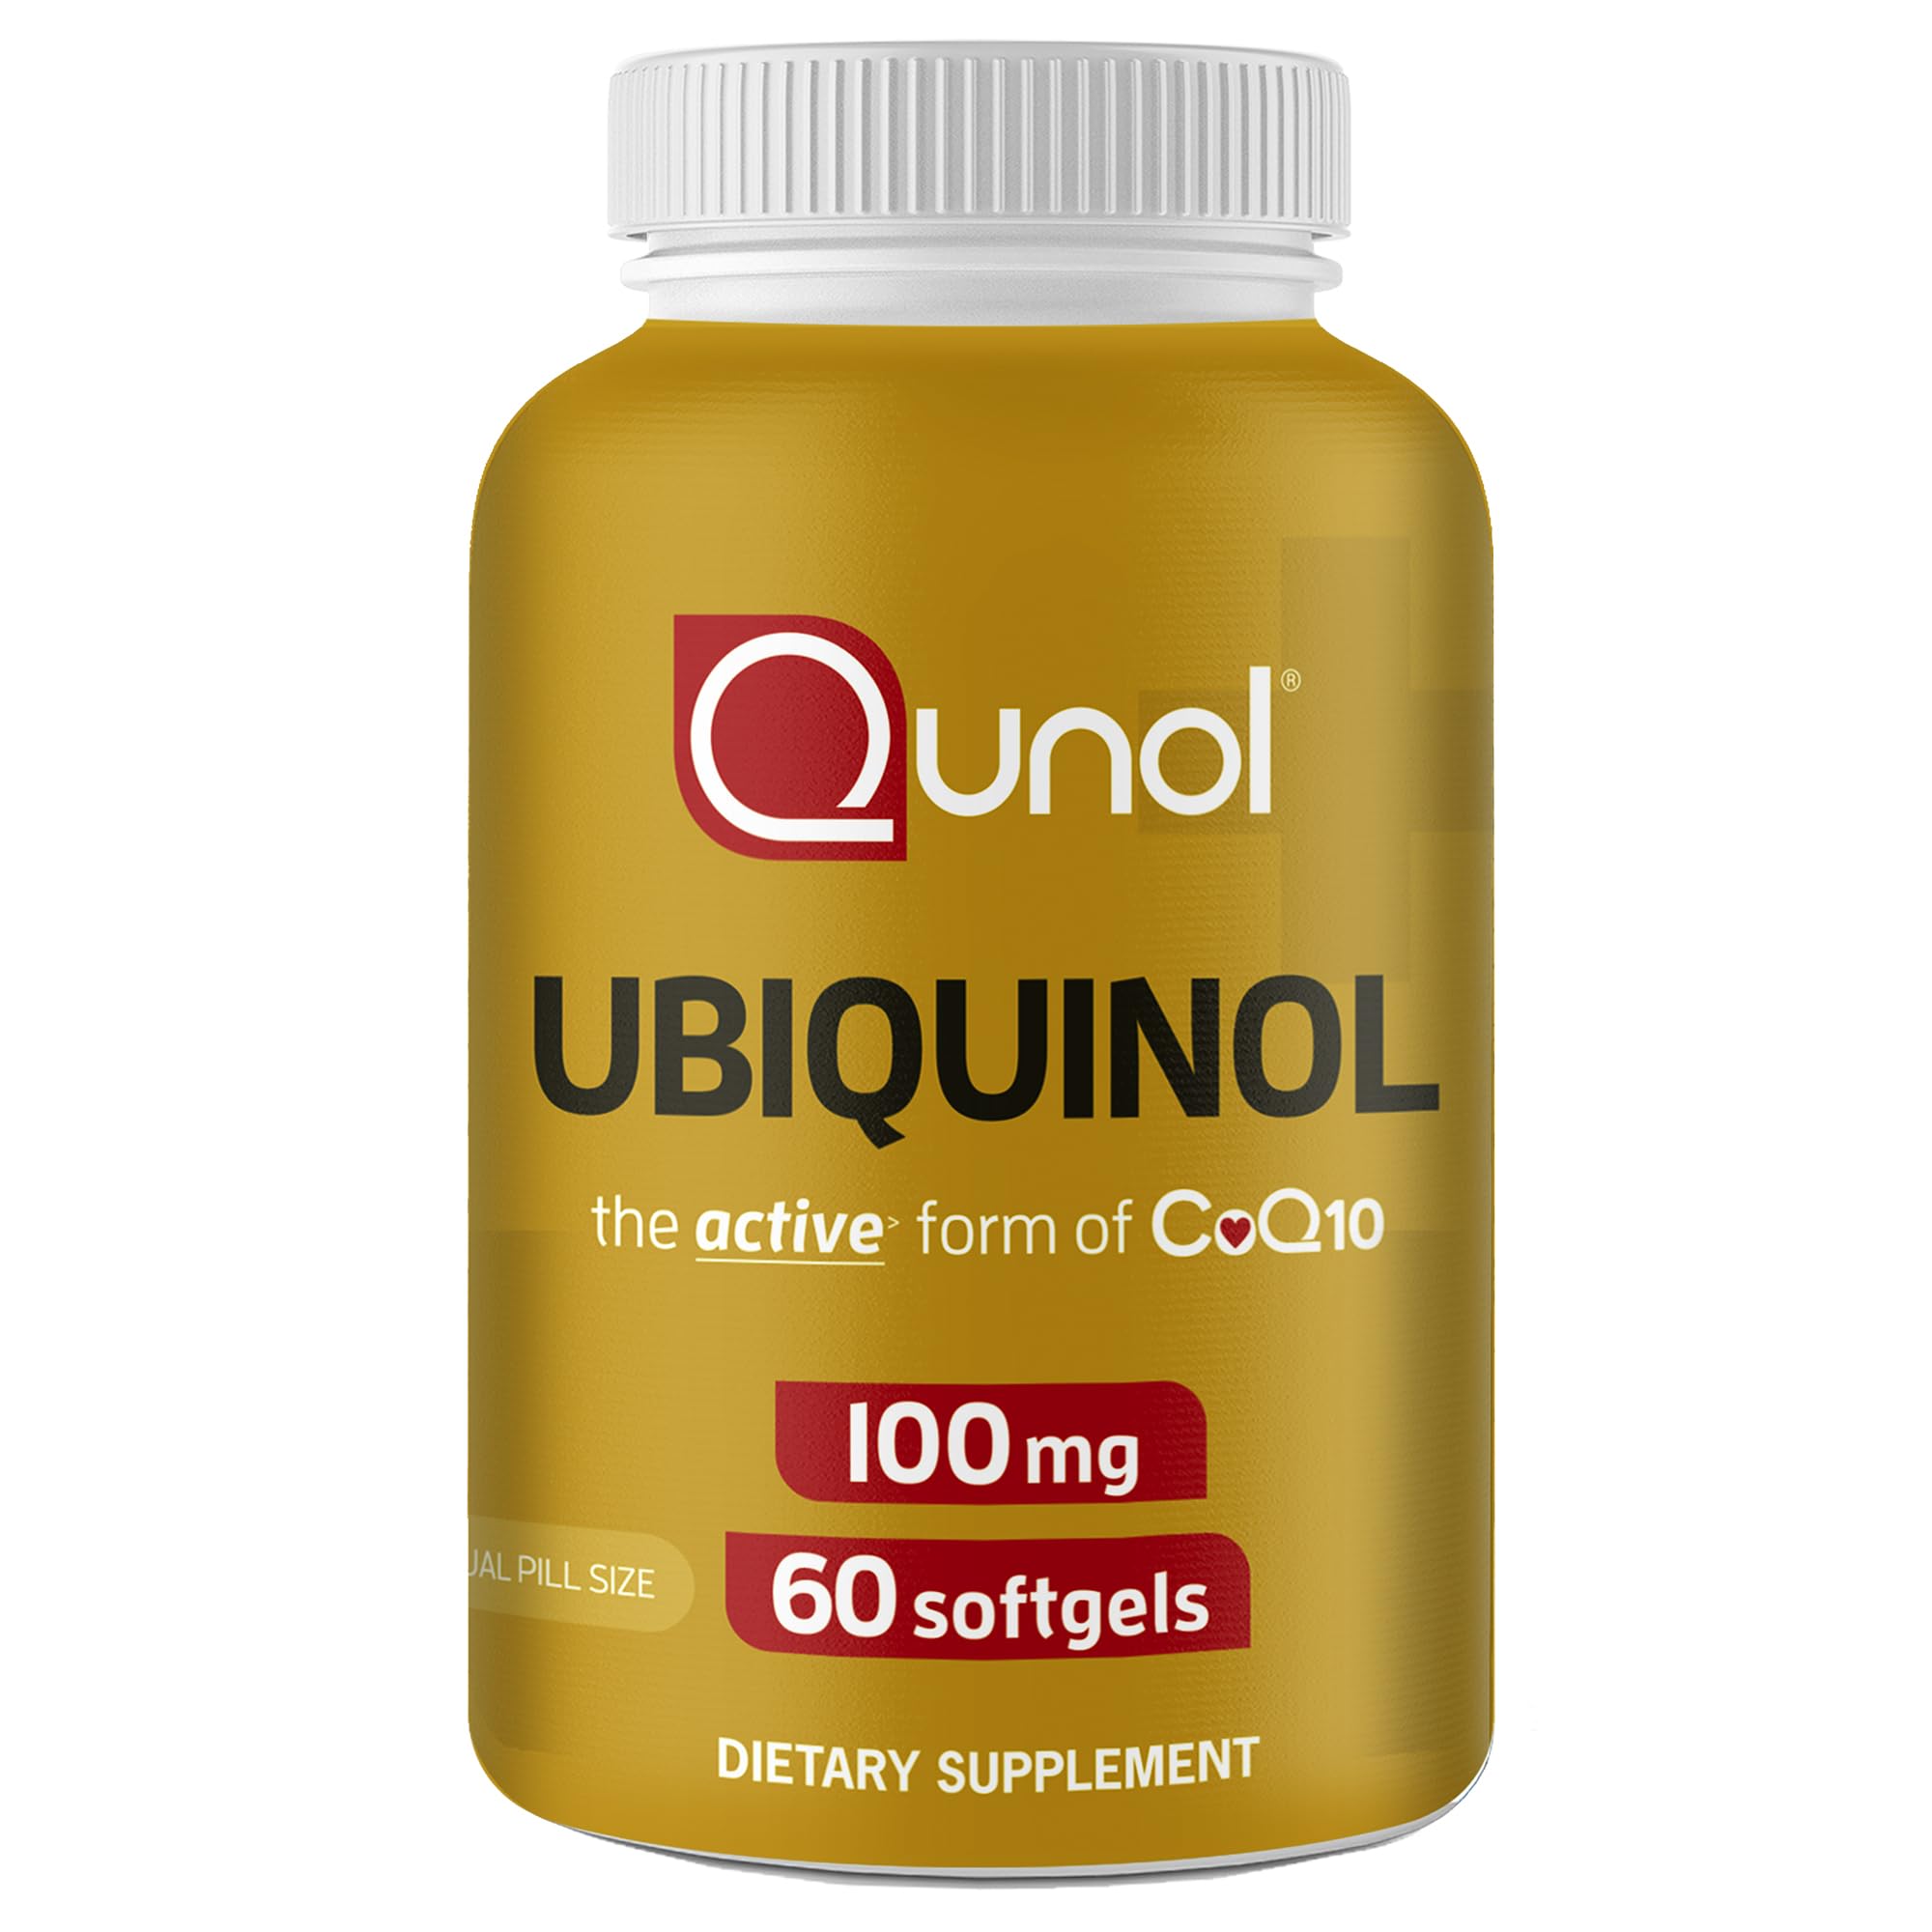 Qunol Ubiquinol CoQ10 100mg Softgels, Ubiquinol - Active Form of Coenzyme Q10, Antioxidant for Heart Health, Healthy Blood Pressure Levels, Beneficial to Statin Users, 60 Count  Only $13.62